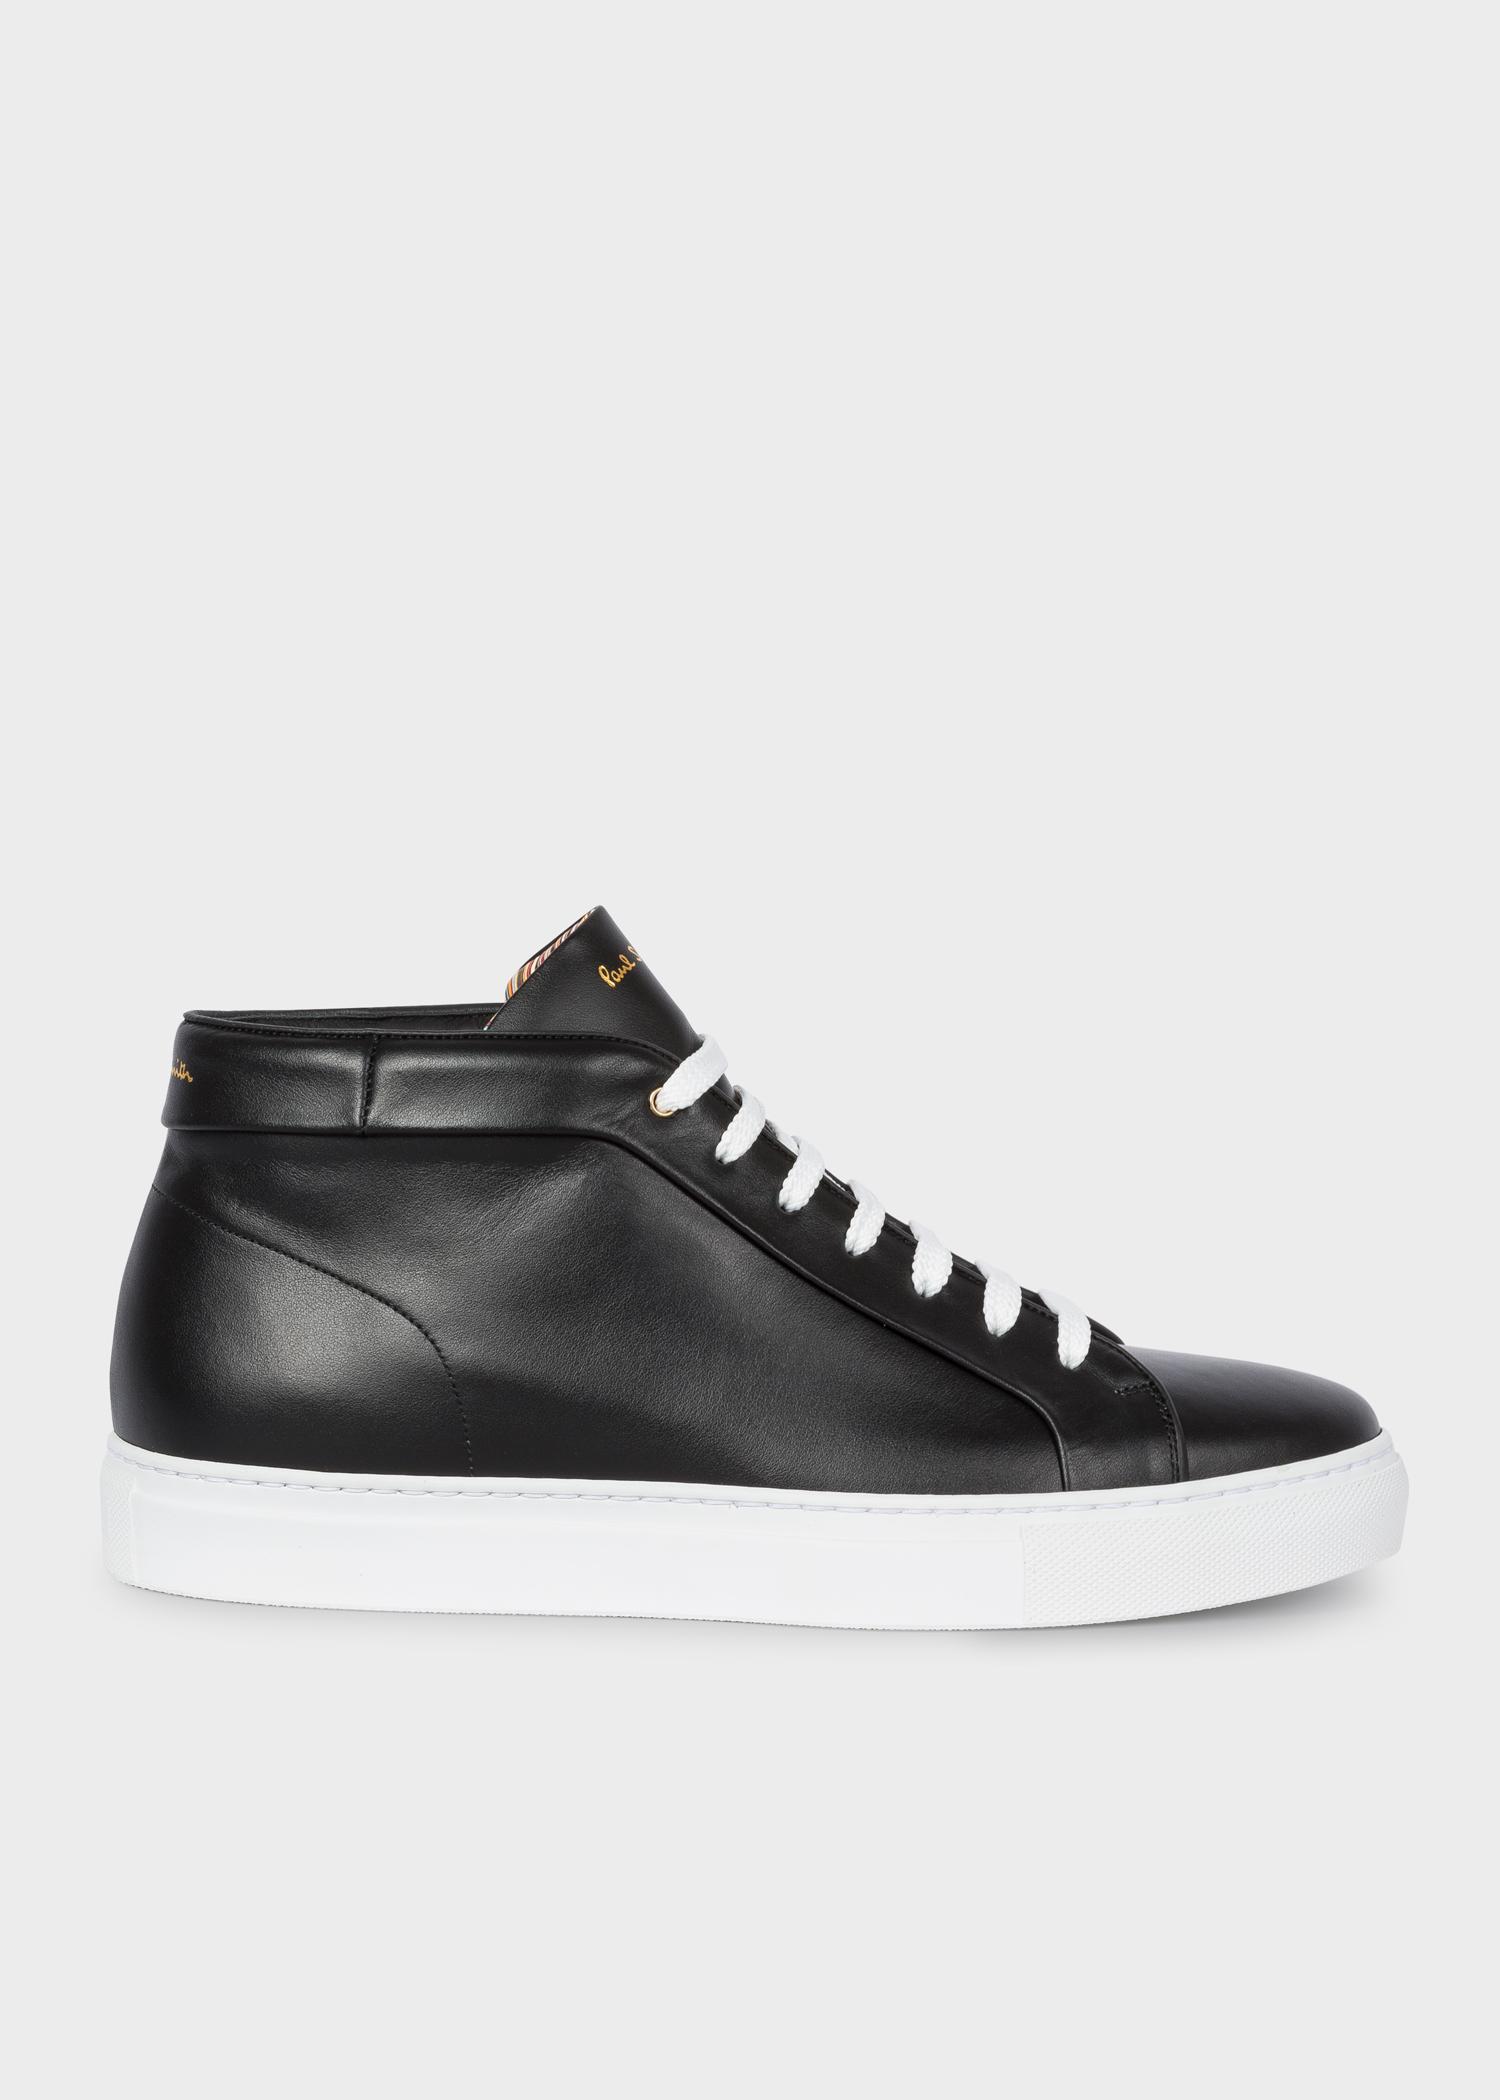 Lyst - Paul Smith Black Leather 'Ace' High-Top Trainers in Black for Men